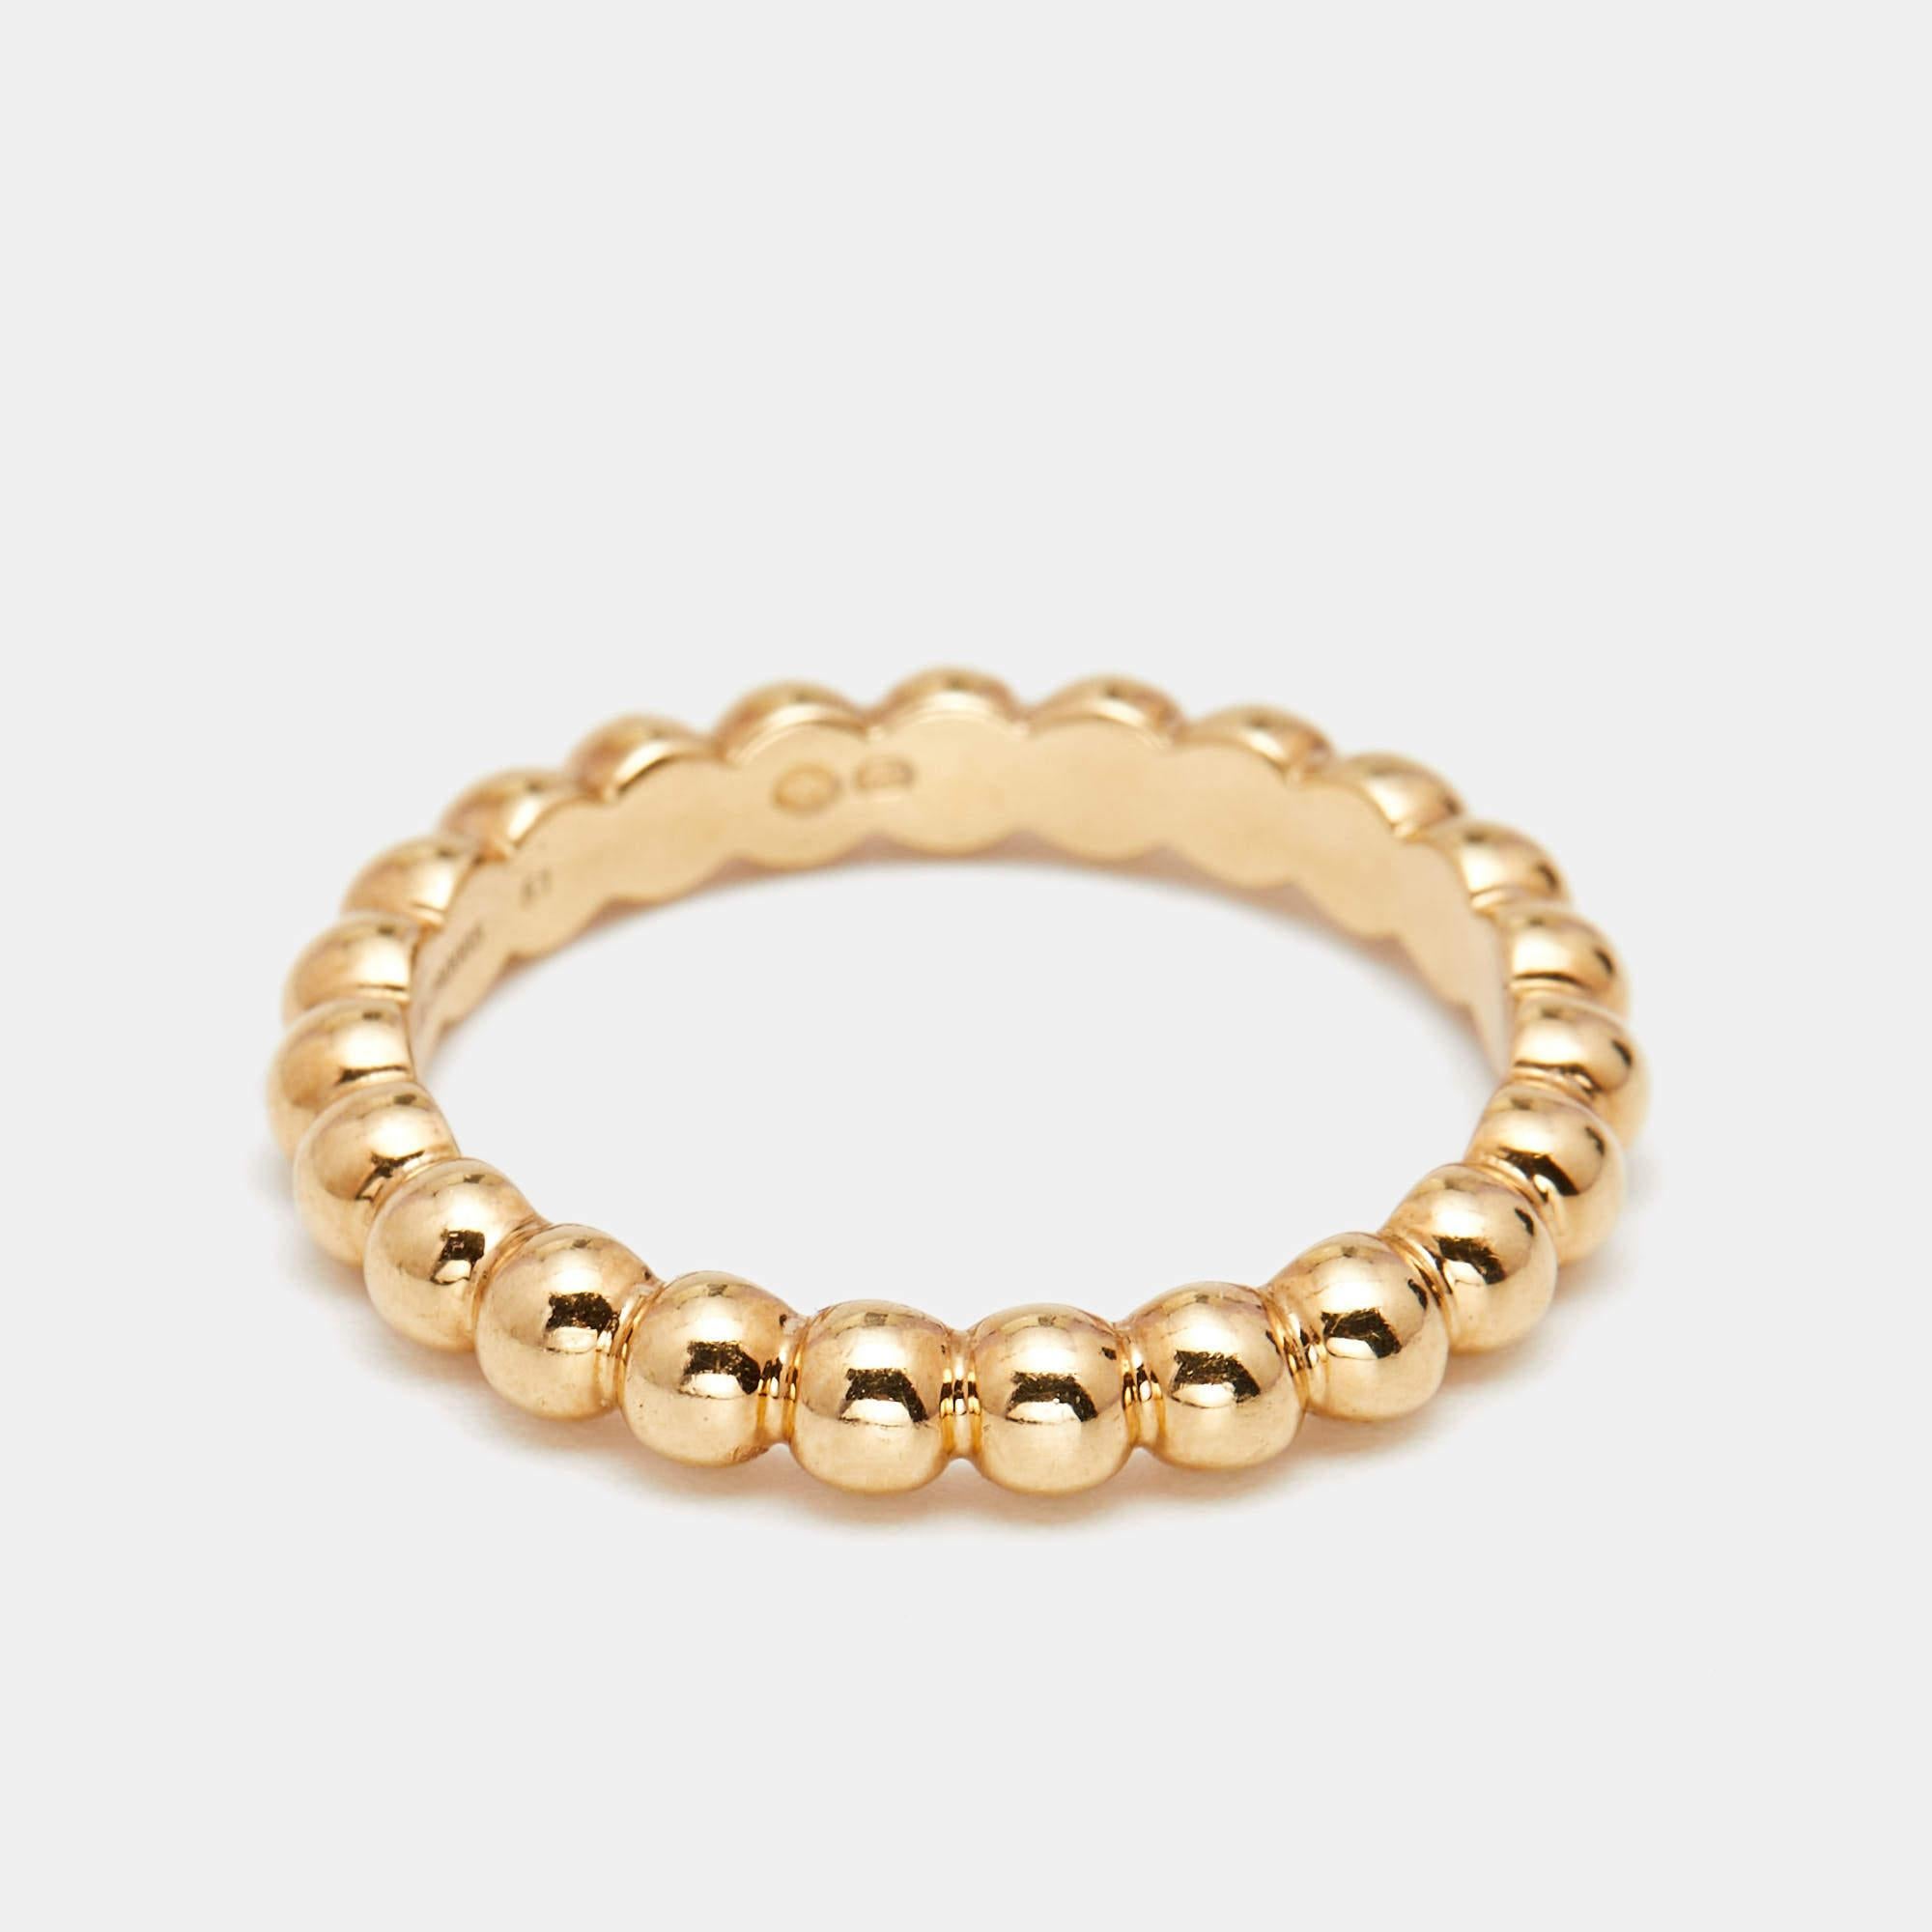 This sleek and classic Perlée ring from the house of Van Cleef & Arpels has been expertly crafted in 18k yellow gold. It comes with an all-over bead detailing. Wear it as a stand-alone ring or stacked with similar band rings for a chic look.

